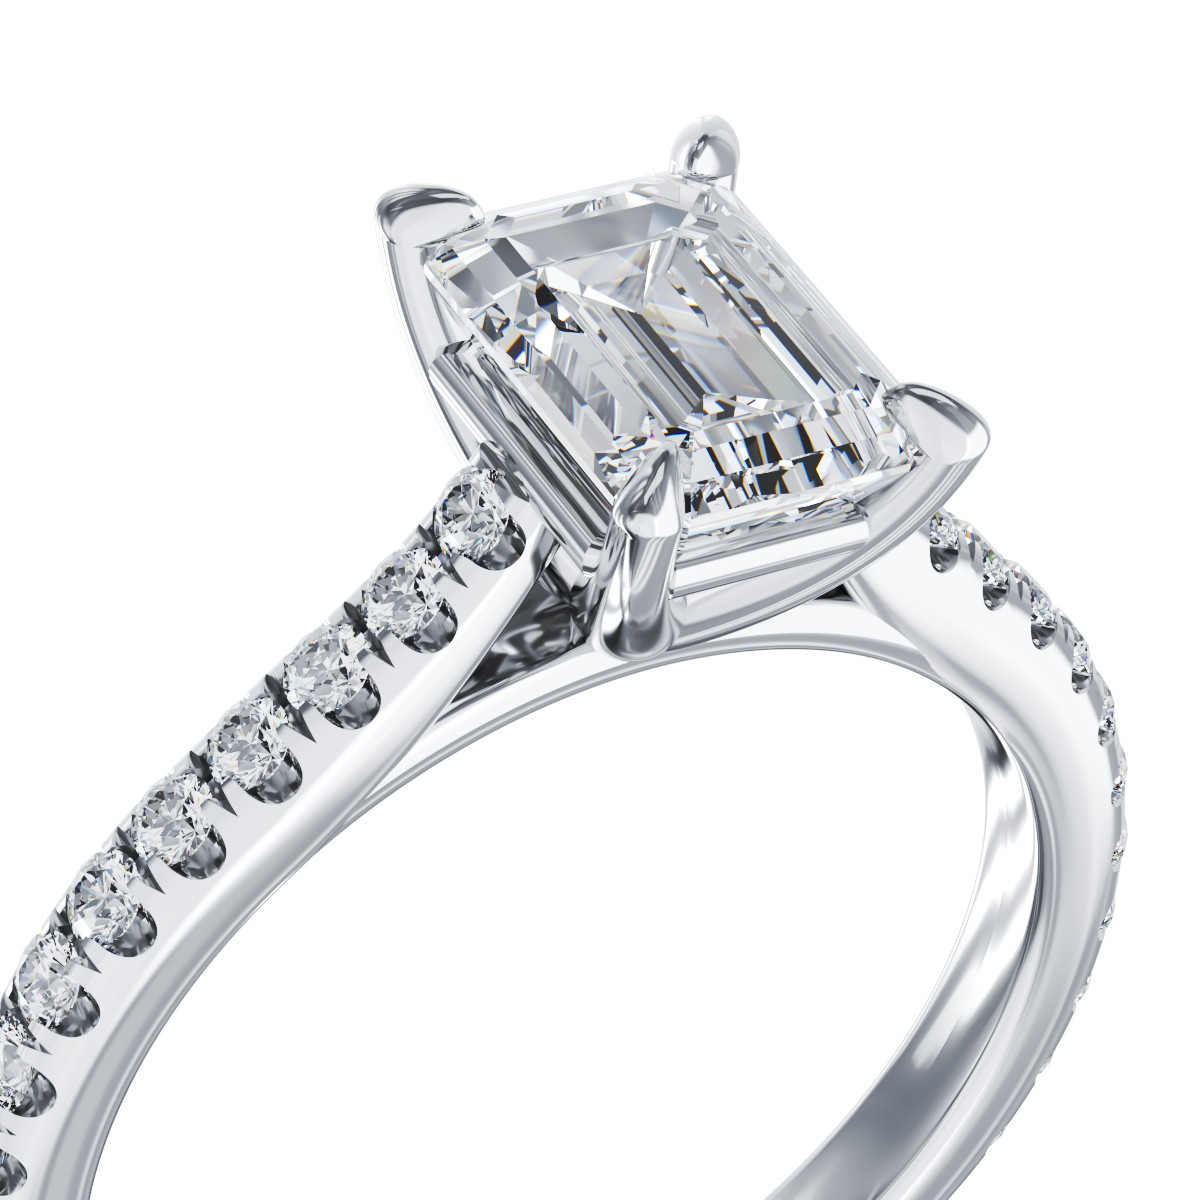 18K white gold engagement ring with 1.2ct diamond and 0.285ct diamonds